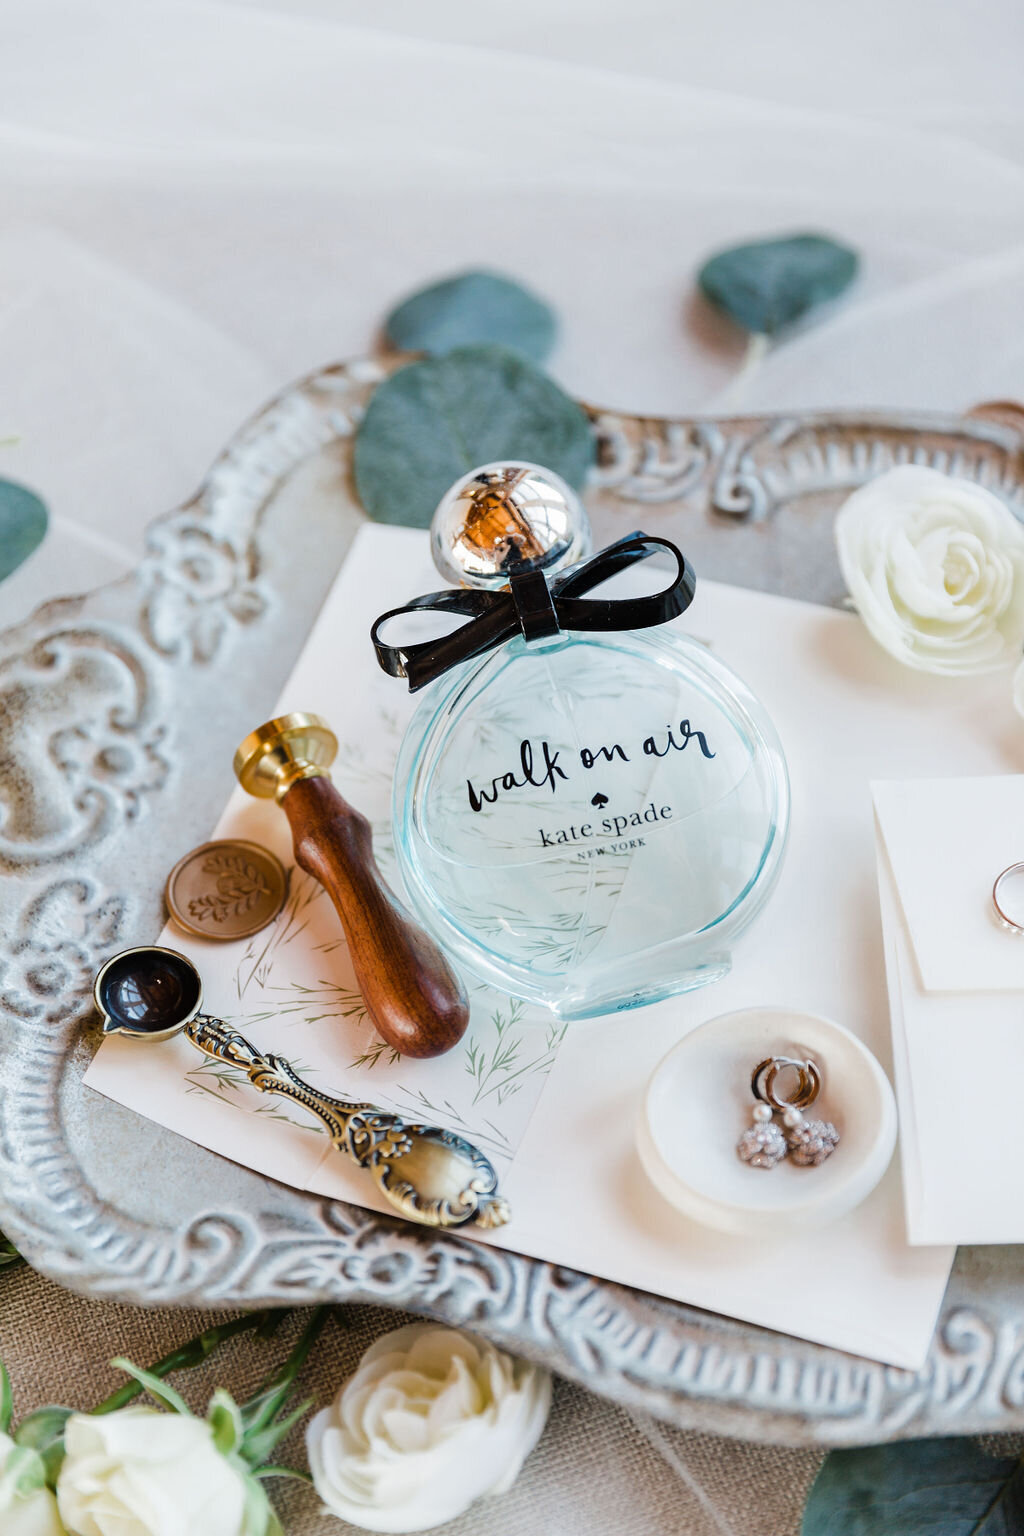 Artistic shot of the bride's perfume bottle, a subtle yet significant detail that adds to the sensory memories of the wedding day